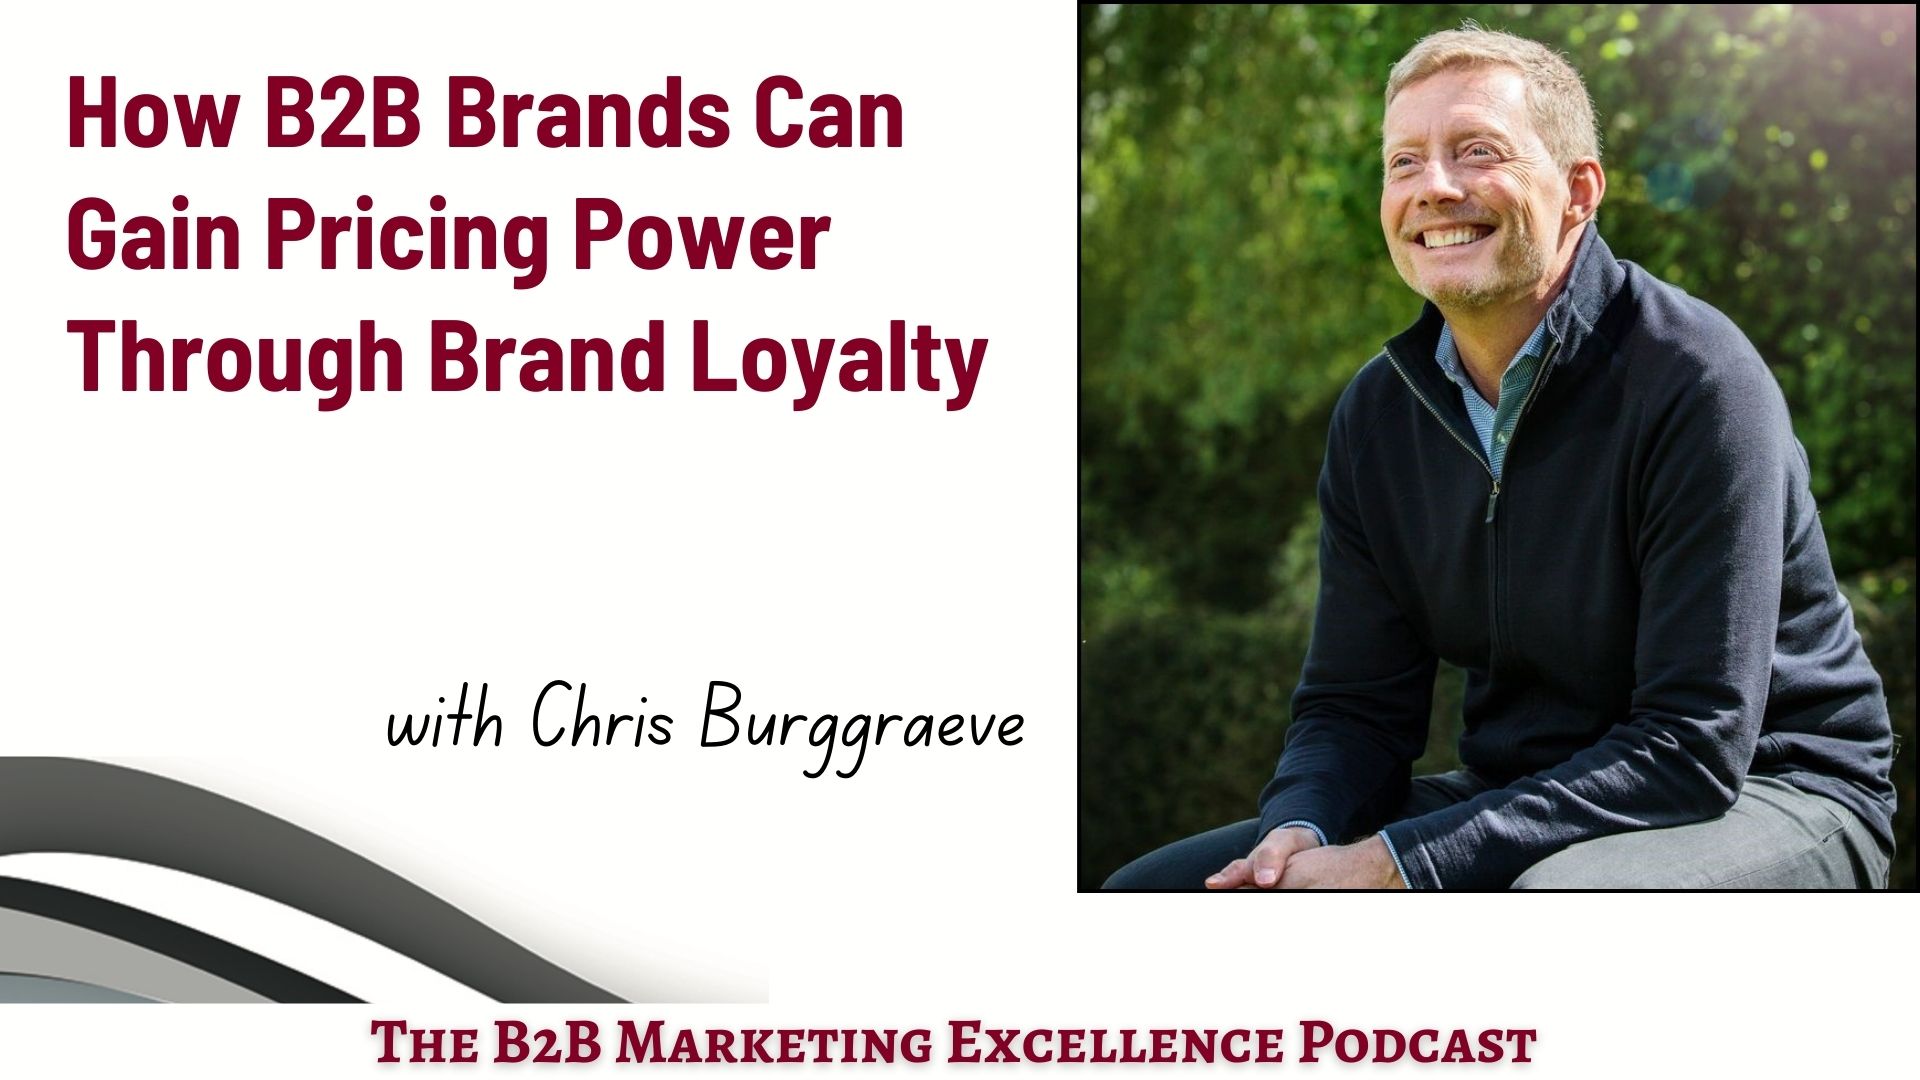 Podcast – How B2B Brands Can Gain Pricing Power Through Brand Loyalty